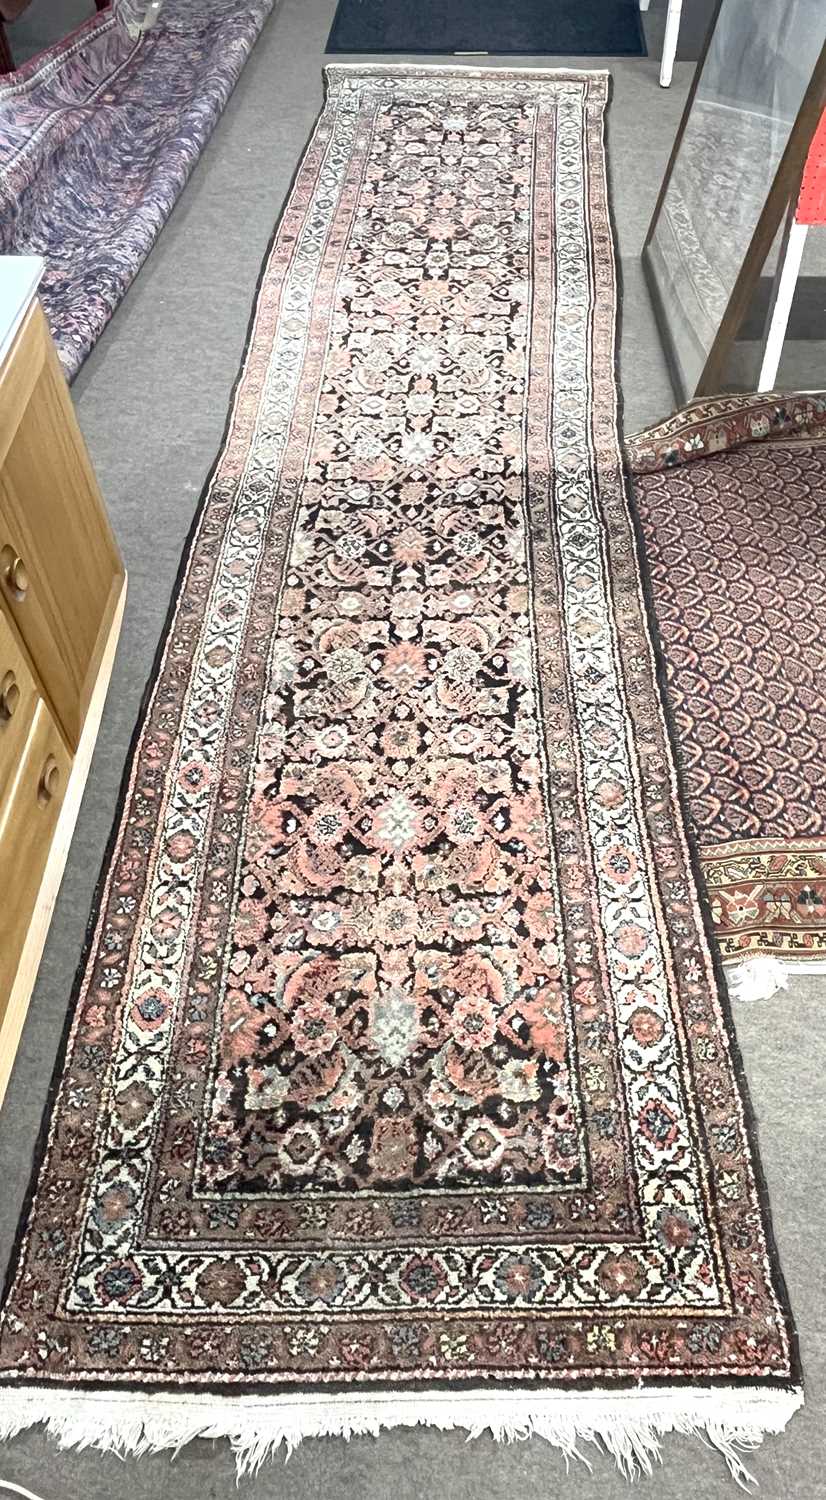 Persian runner carpet with floral pattern 395cm x 98 cm - Image 4 of 4